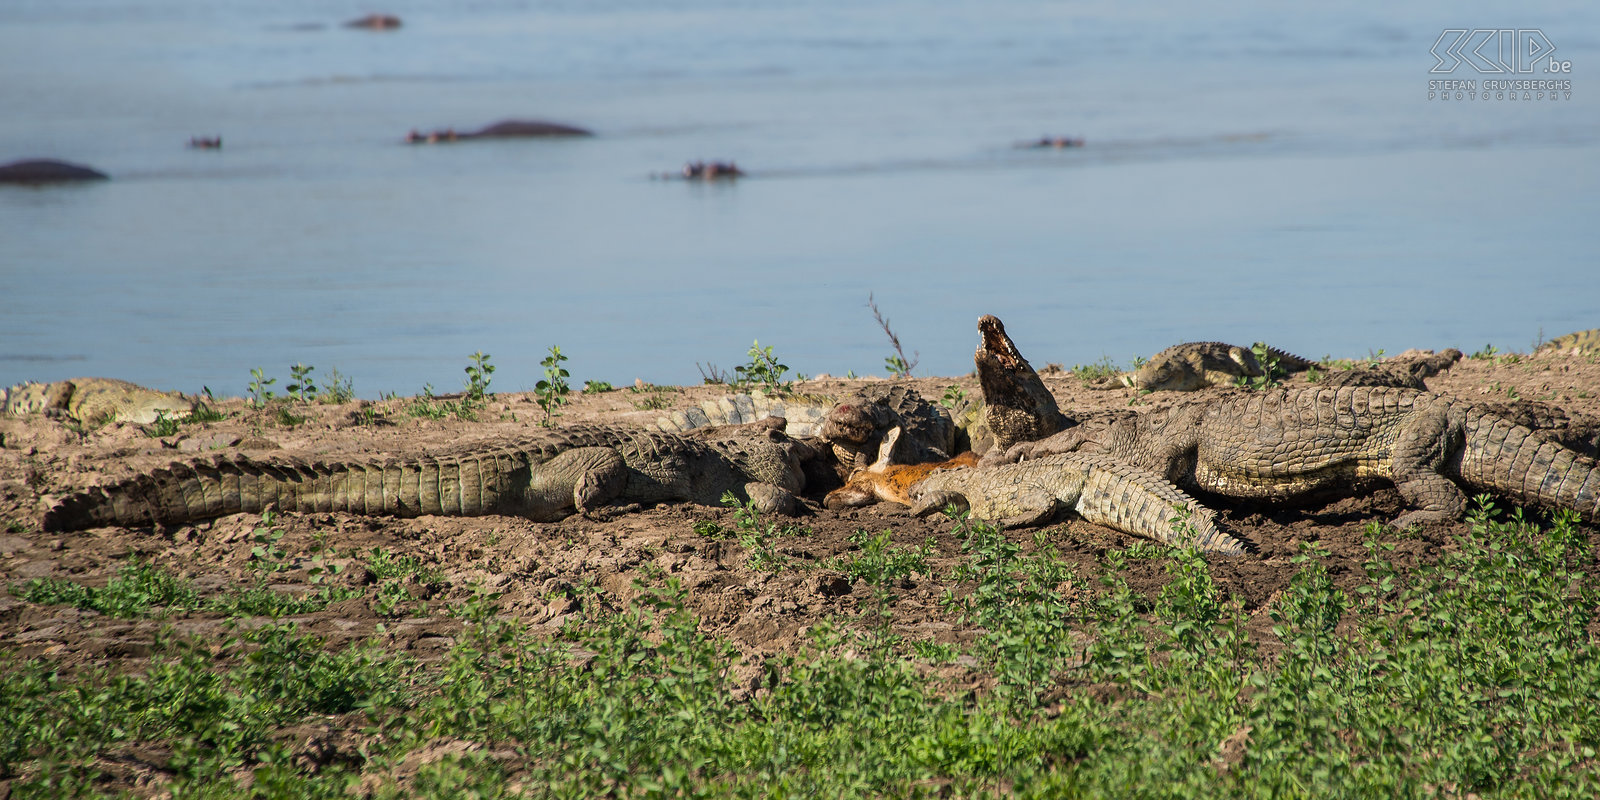 South Luangwa - Crocodiles with killed puku Our second morning in South Luangwa ended with some great and unique action. Near the riverbanks we found a float of crocodiles eating an adult male puku (antelope). The puku was probably killed by a leopard at night and the leopard waited too long to drag its prey into the bushes. Crocodiles that have a very good sense of smell were able to conquer the killed puku. It was very impressive to see the crocodiles ripping off and swallowing chunks of flesh. They were also twisting their bodies to tear off large pieces of meat. Stefan Cruysberghs